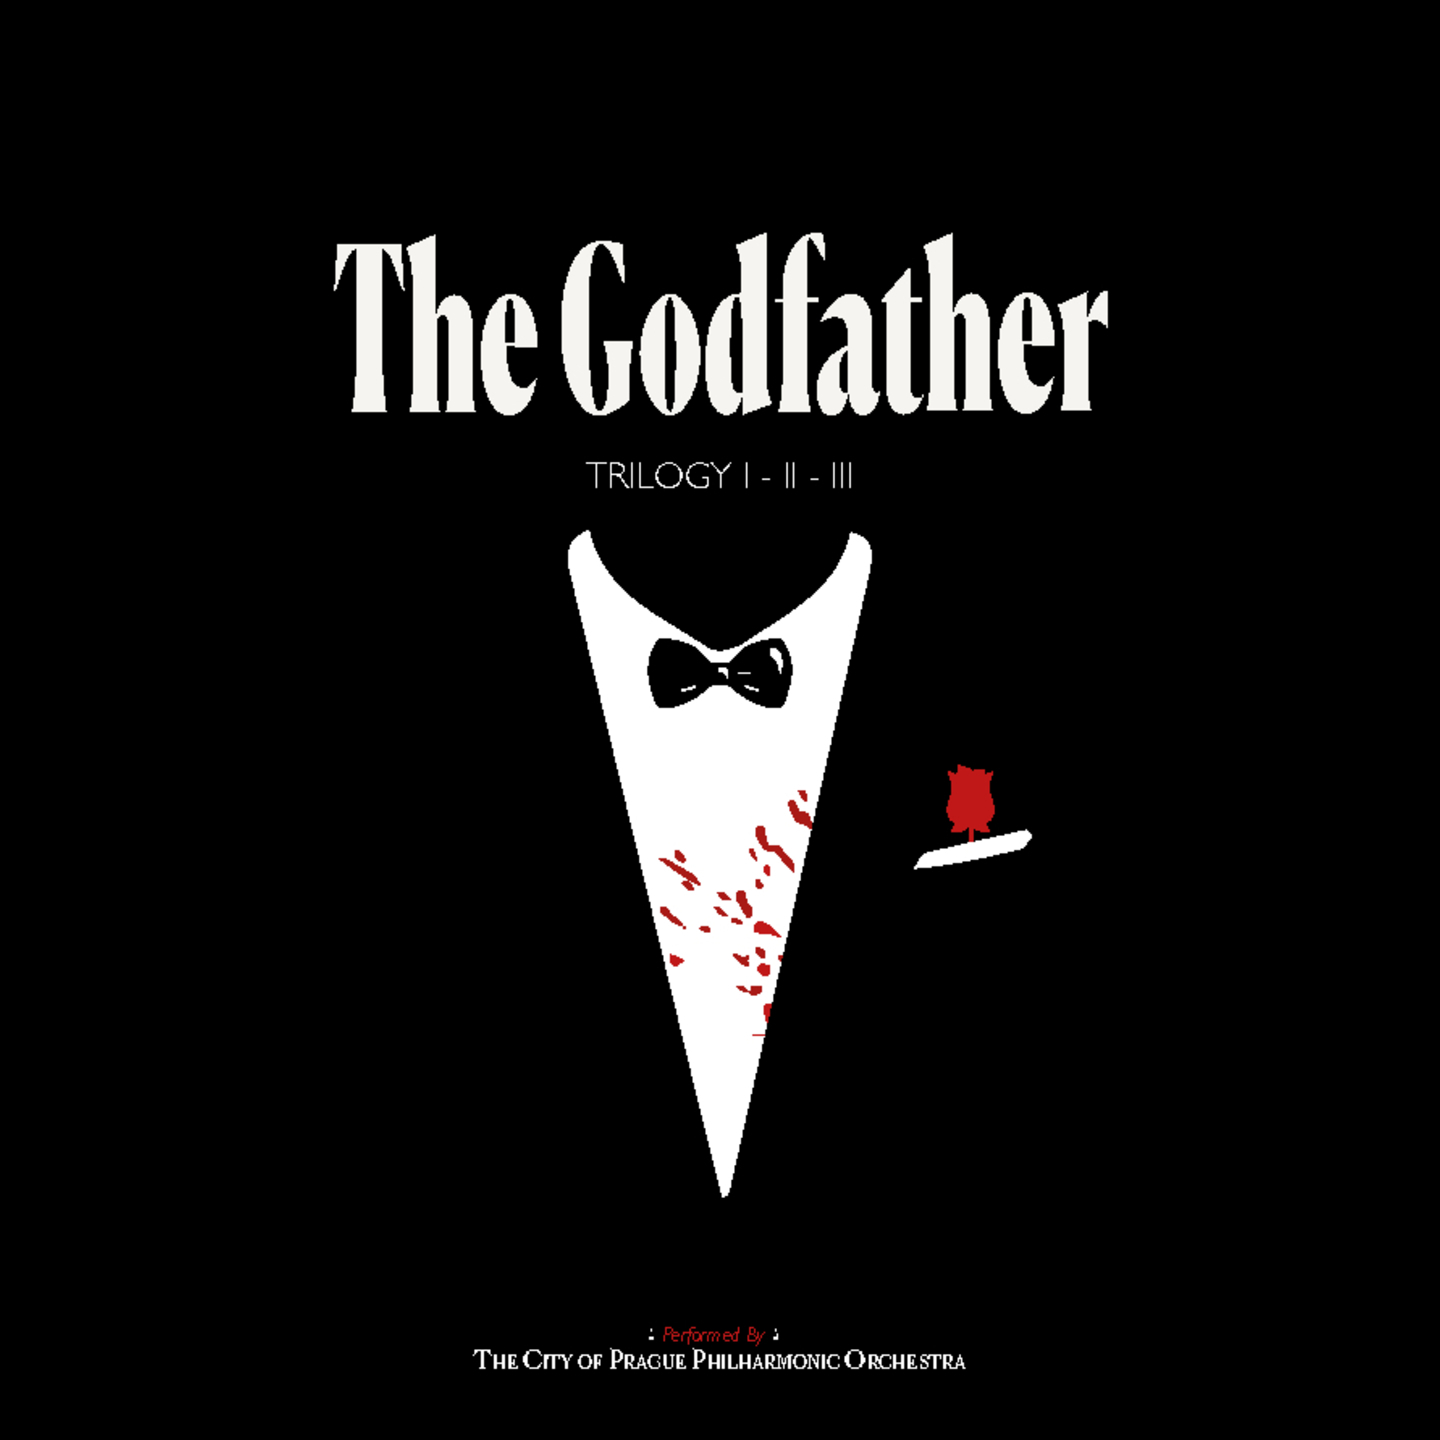 CITY OF PRAGUE PHILHARMONIC ORCHESTRA, THE - The Godfather Trilogy 2xLP (Splatter Grey And Red Vinyl)